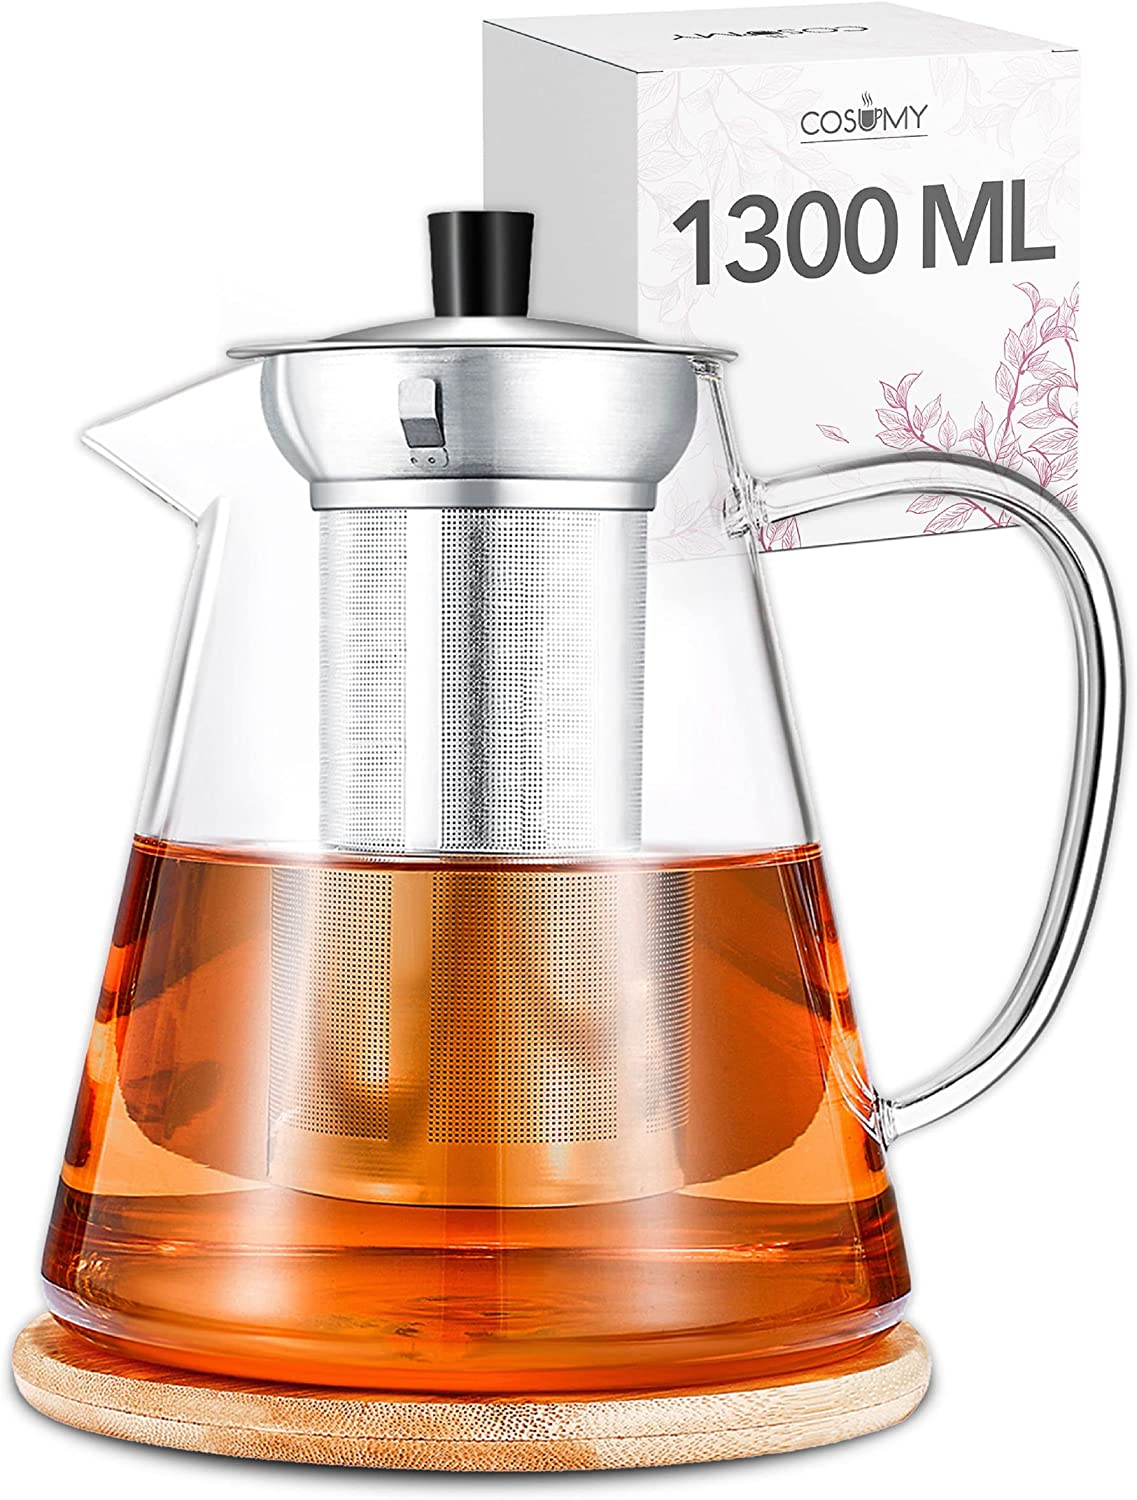 Cosumy Teapot With Stainless Steel Strainer, 1300 ml, Made Of Glass, Incl. Saucer, Dishwasher-Safe, Heat-Resistant